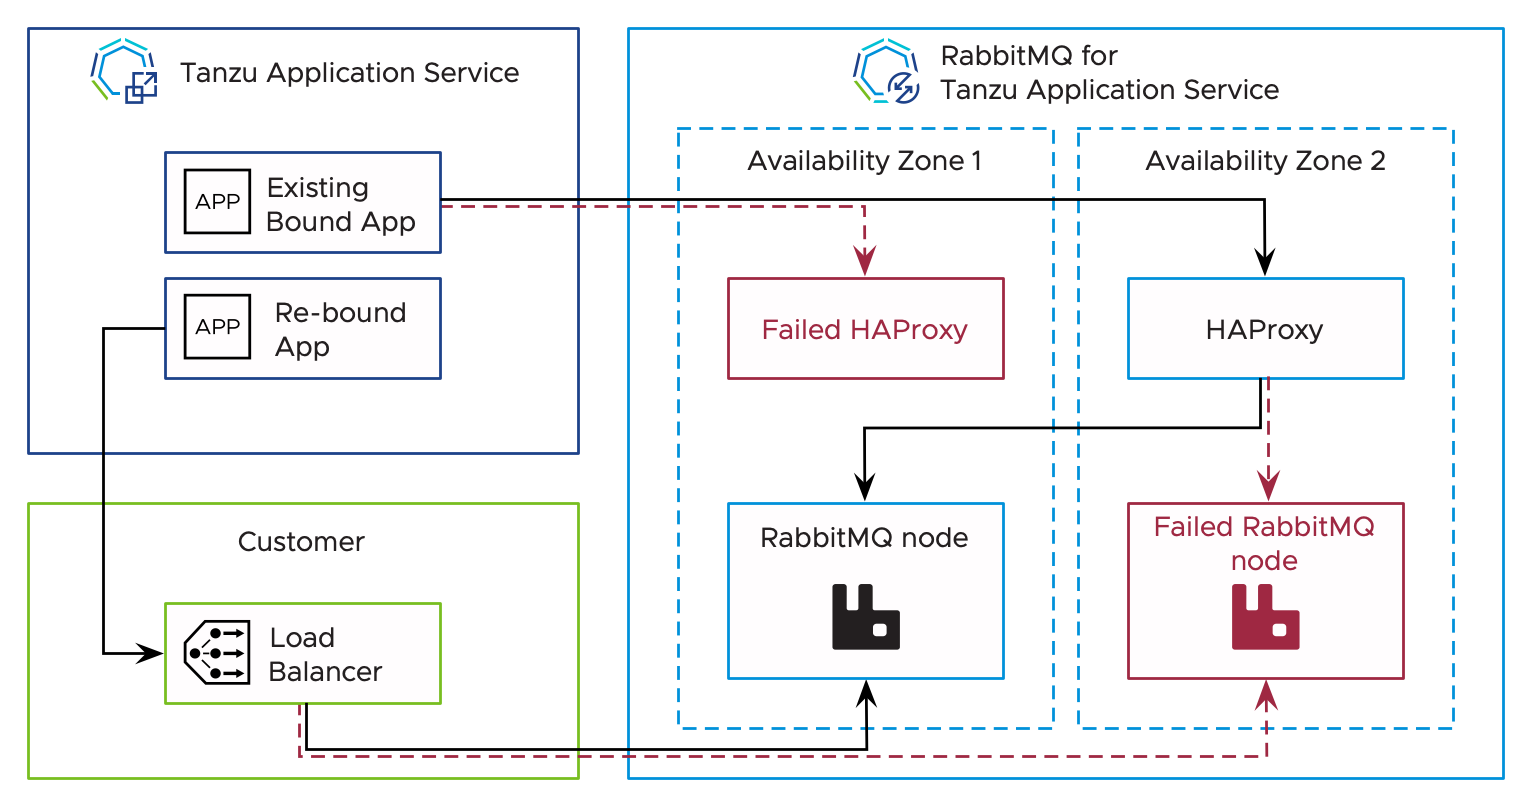 Tanzu Application Service has an existing bound app and a re-bound app.
The existing bound app goes through the same sequence as the diagram in the recommended
deployment. It communicates with the working RabbitMQ node through the HAProxy.
The re-bound app communicates with the customer's load balancer, which then communicates
directly to the working RabbitMQ Node.